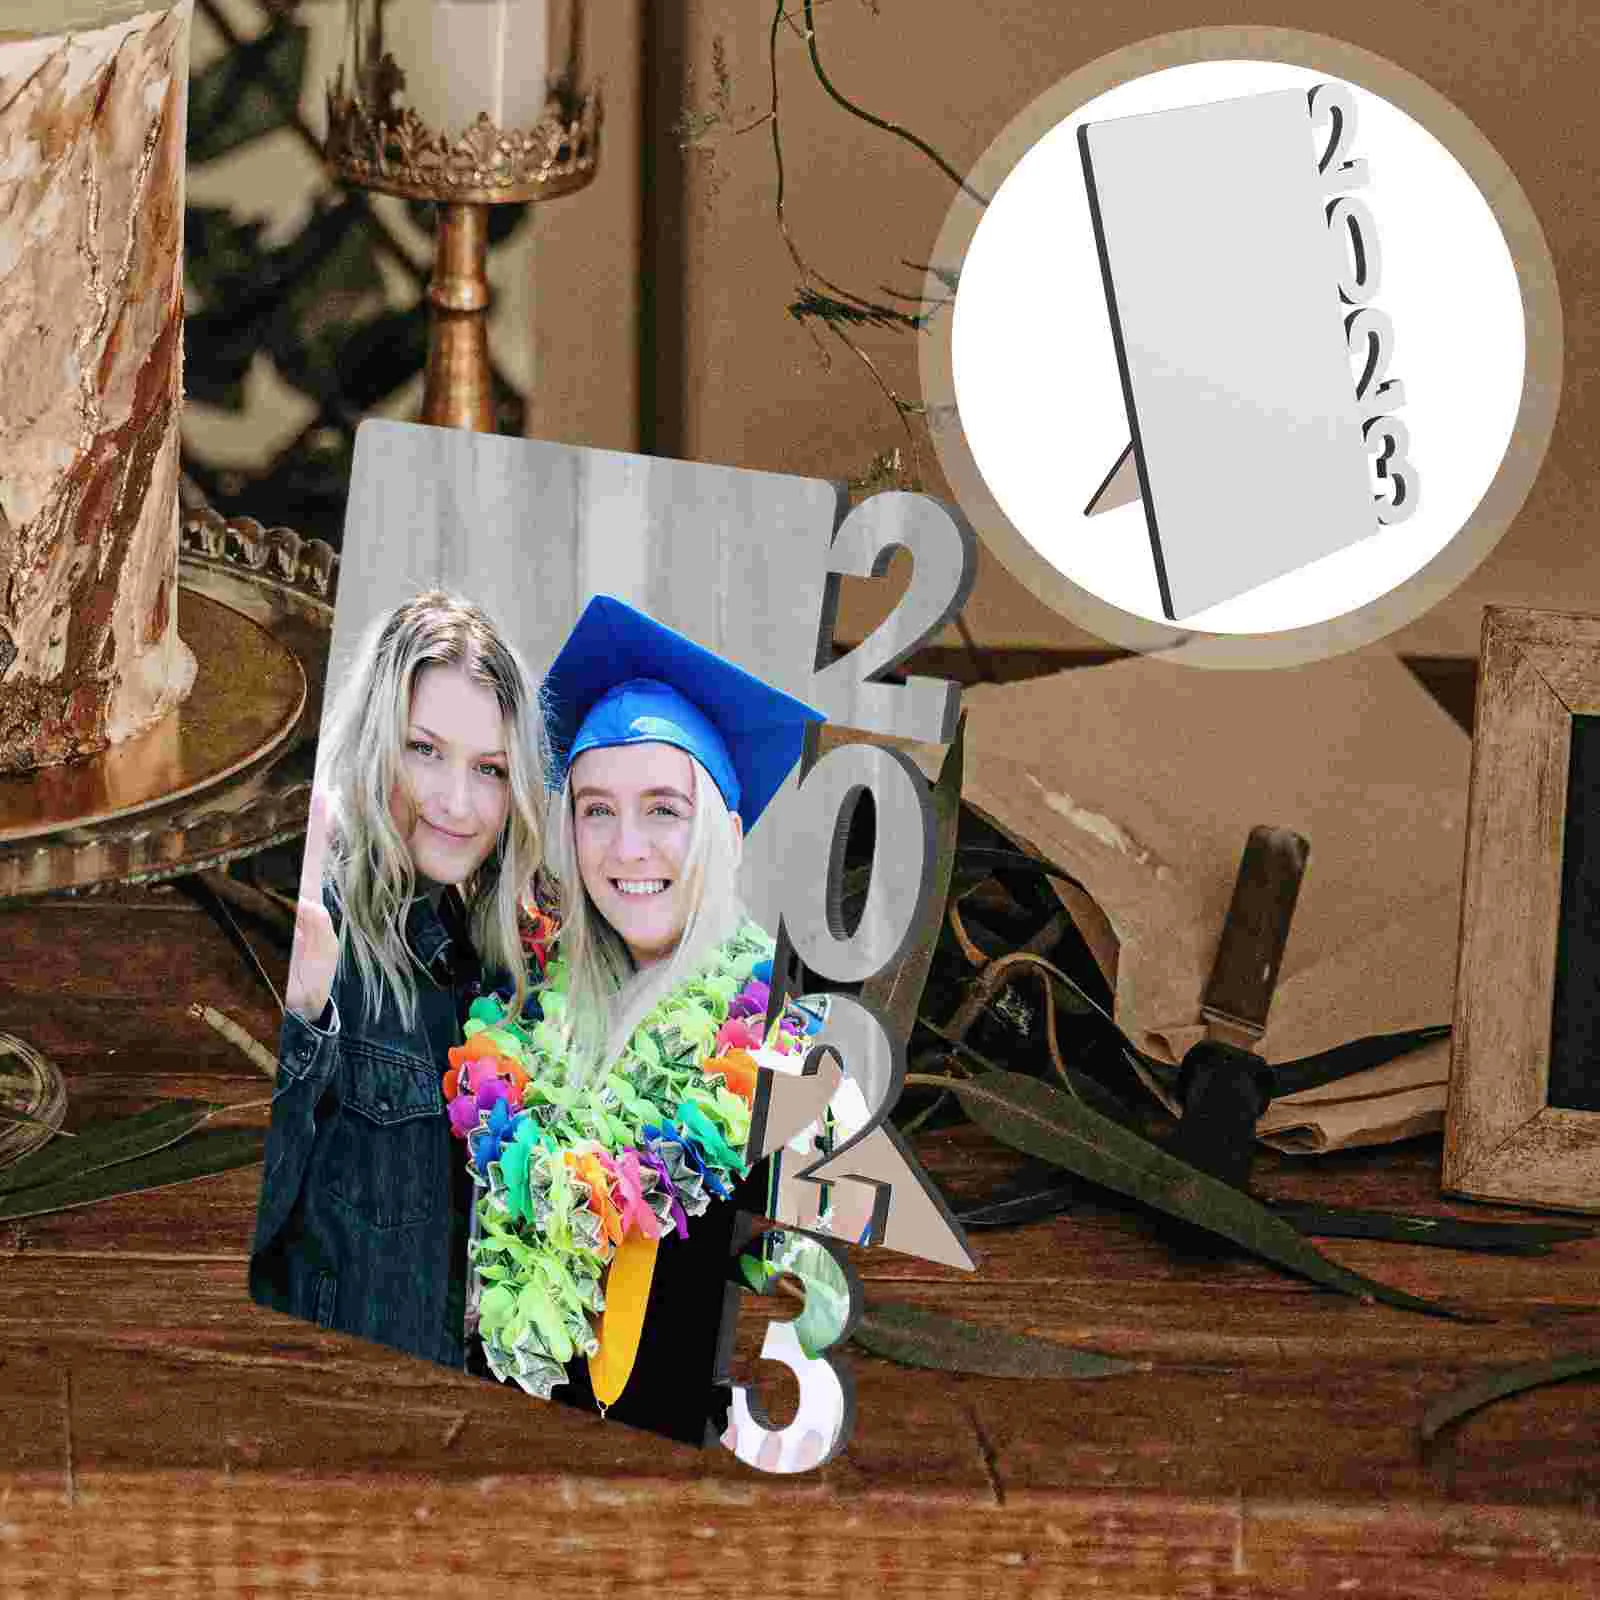 Home Personalized Picture Frame Grad DIY Crafts for Party Graduation Birthday